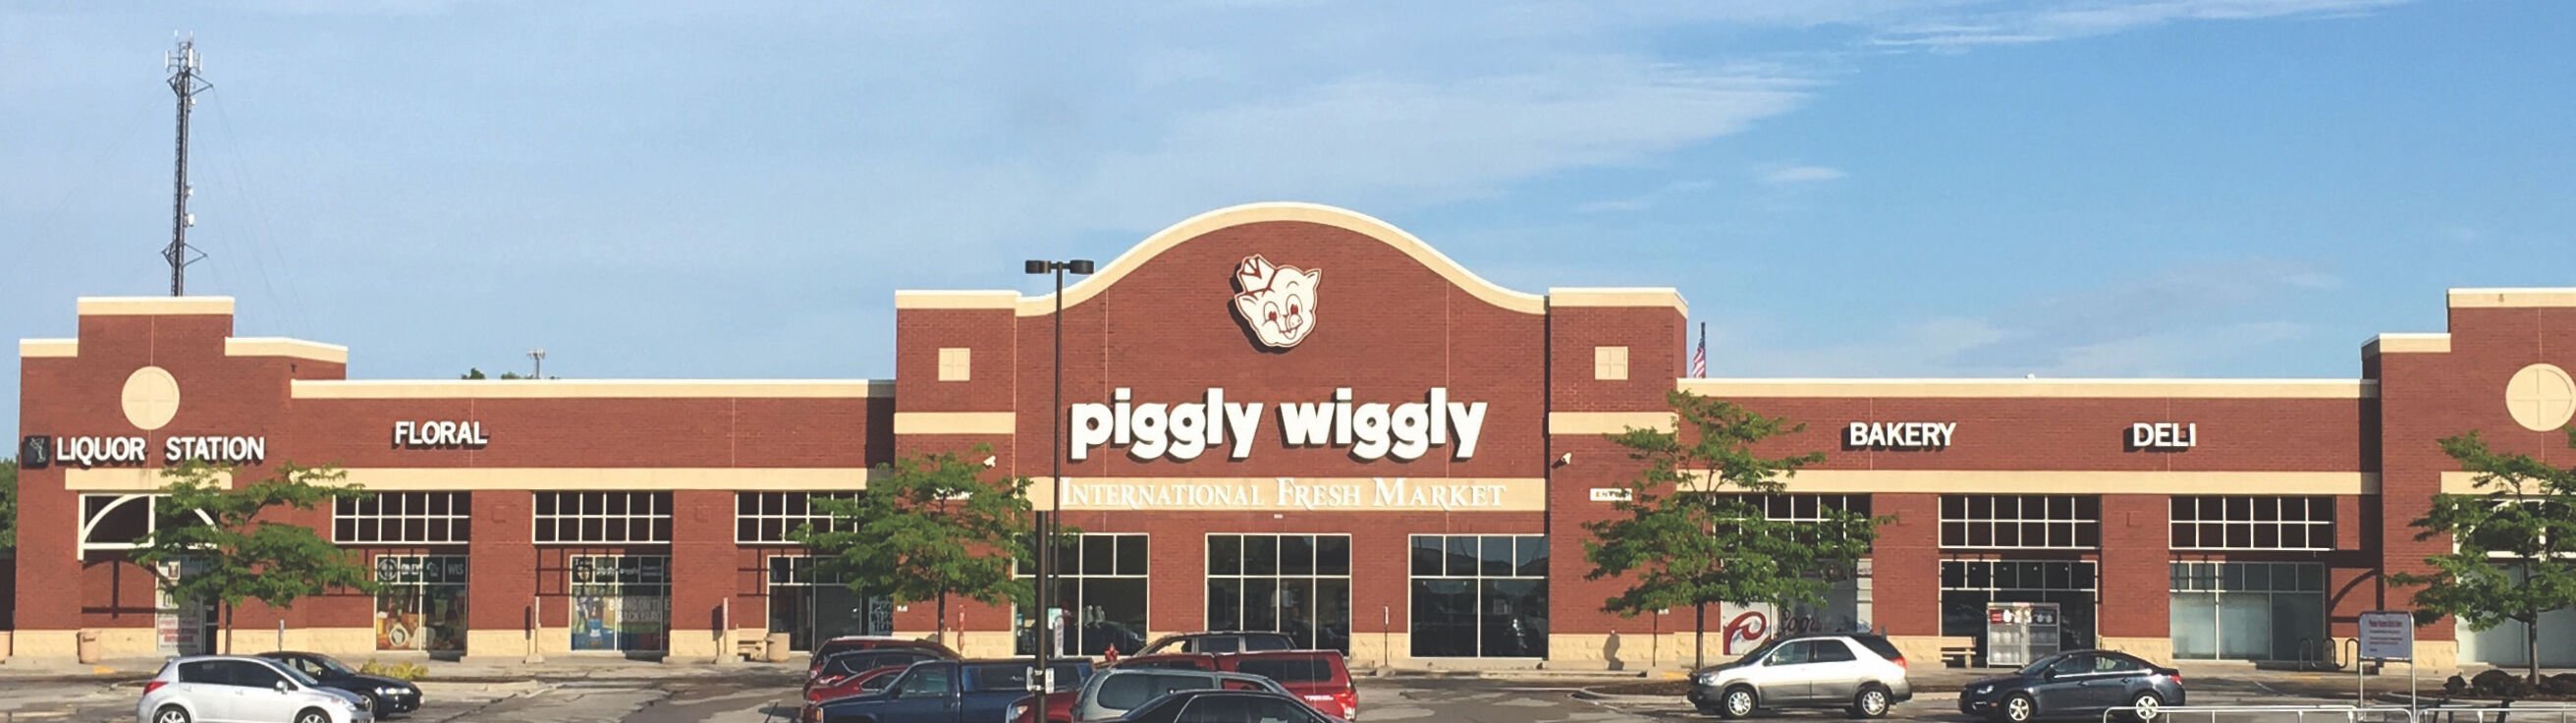 piggly wiggly midwest